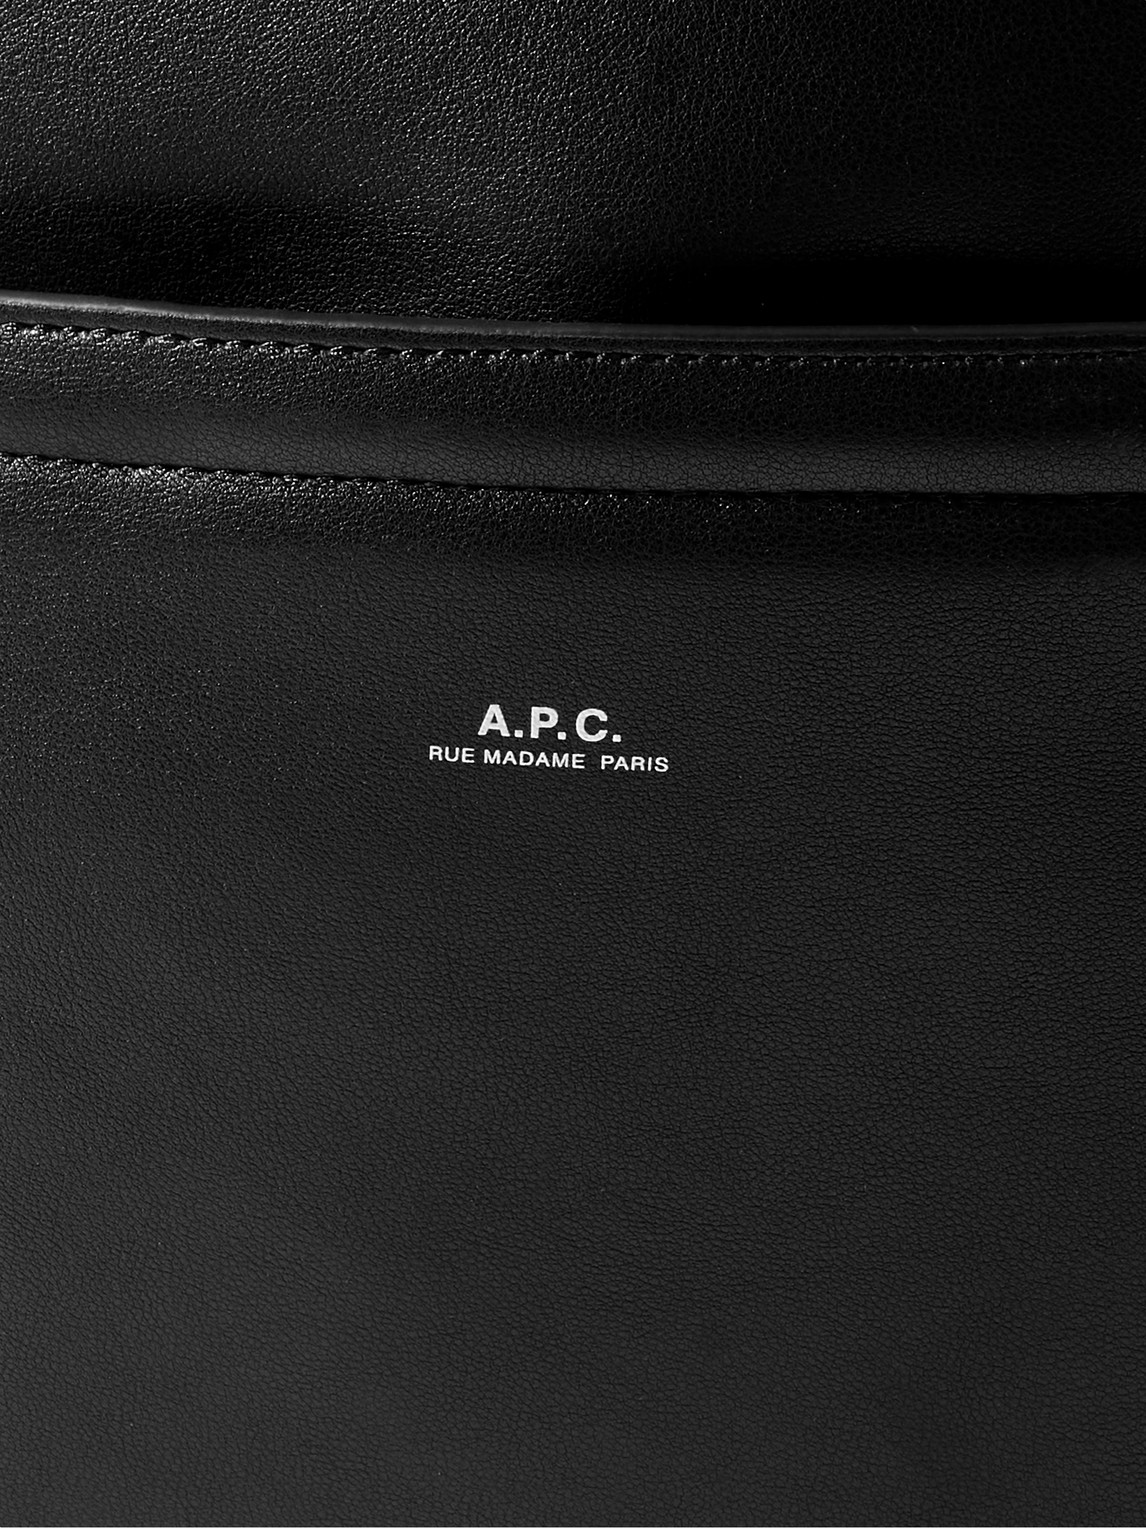 A.P.C. logo-stamp faux-leather Backpack - Farfetch